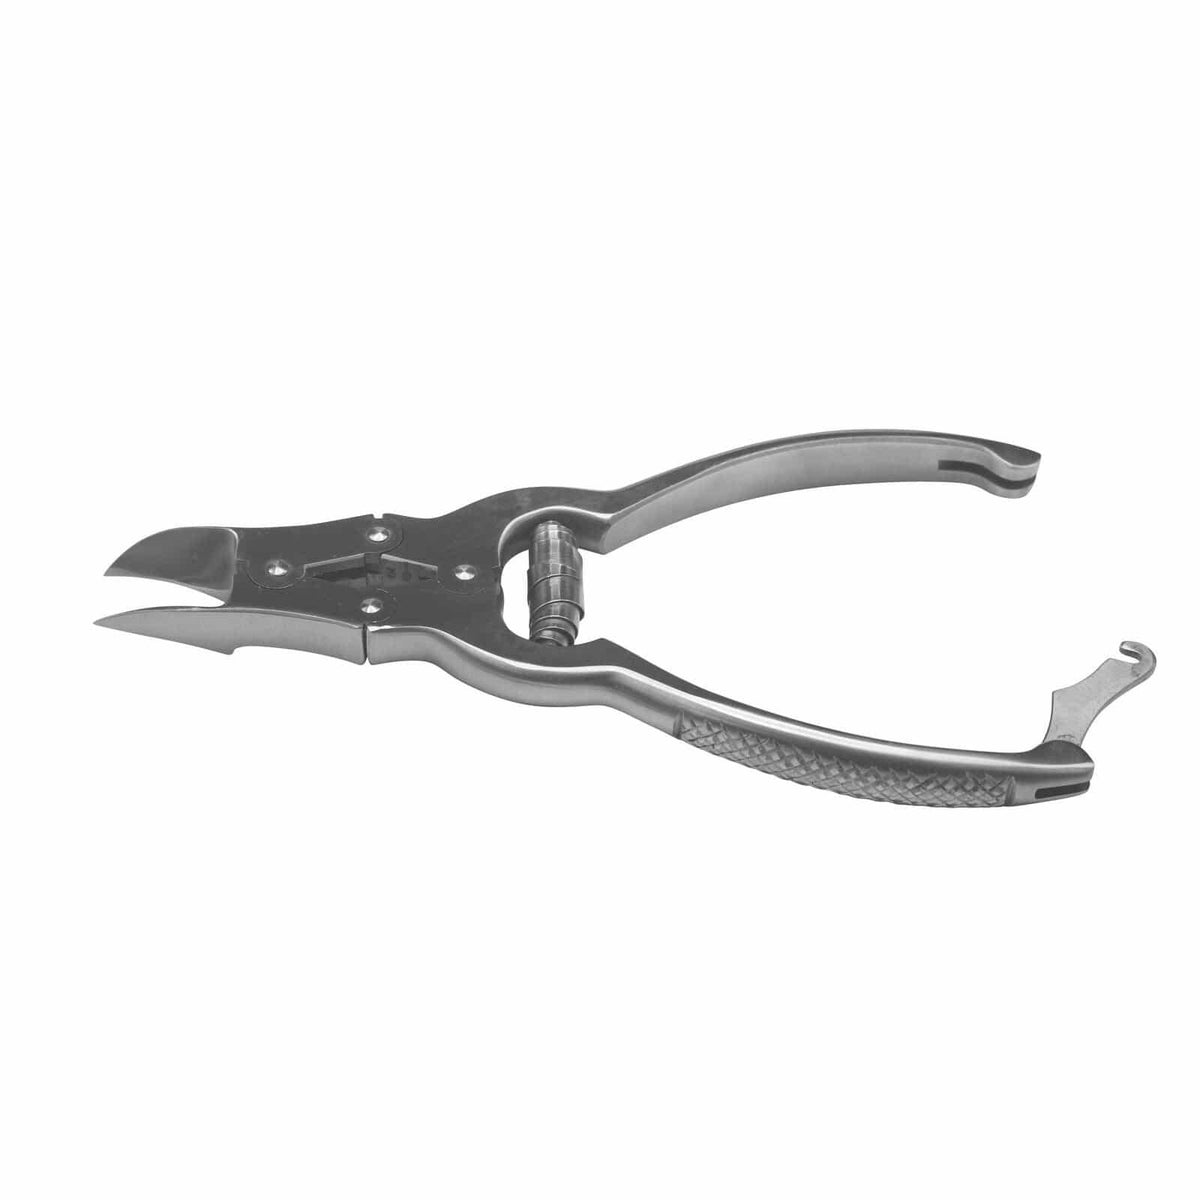 Armo 15.5cm / Straight Armo Nail Cutters Compound Action with Lock